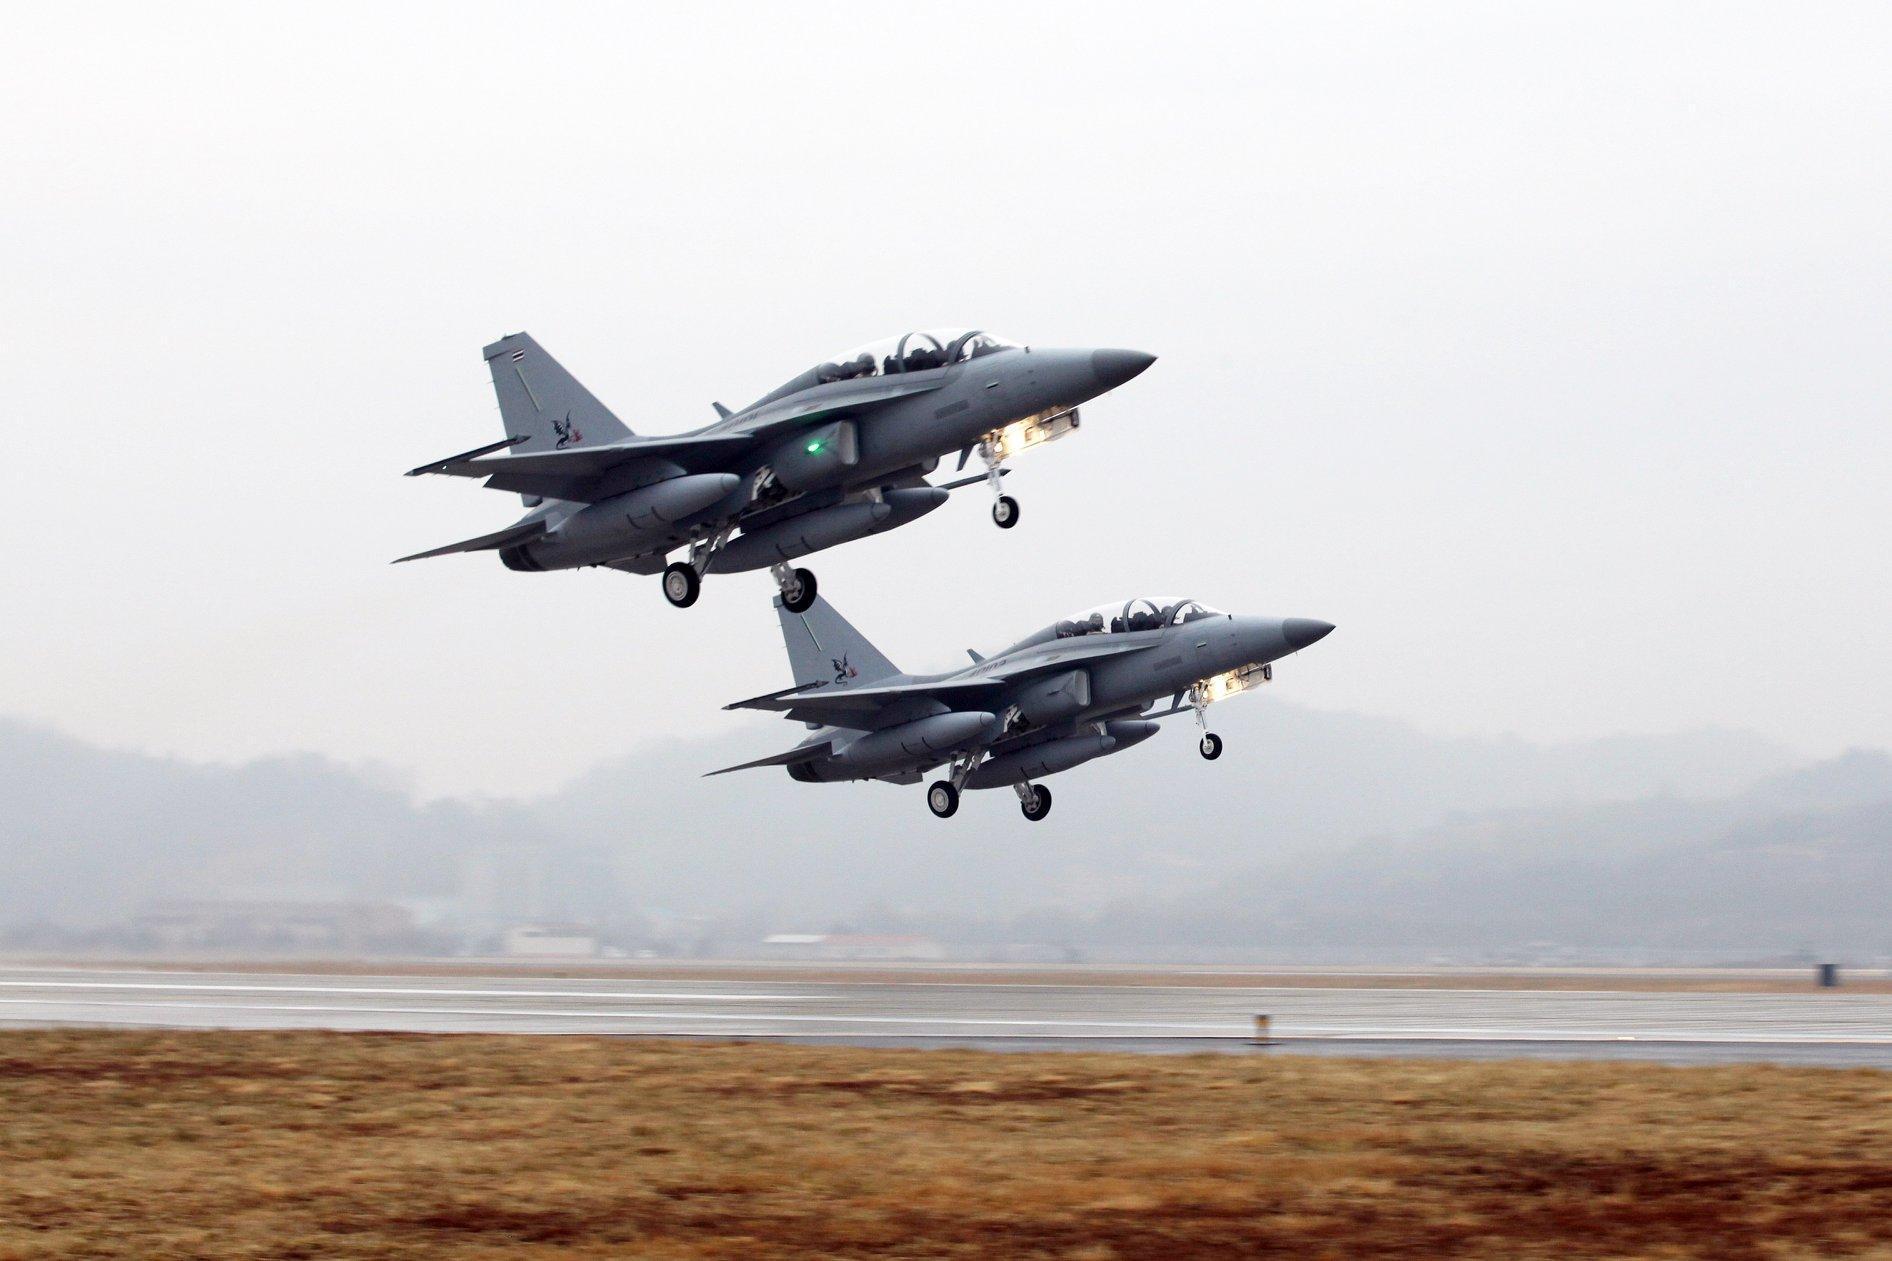 Korea Aerospace Industries Co. (KAI) will deliver two more T-50TH advanced trainer jets to Thailand by November 2023